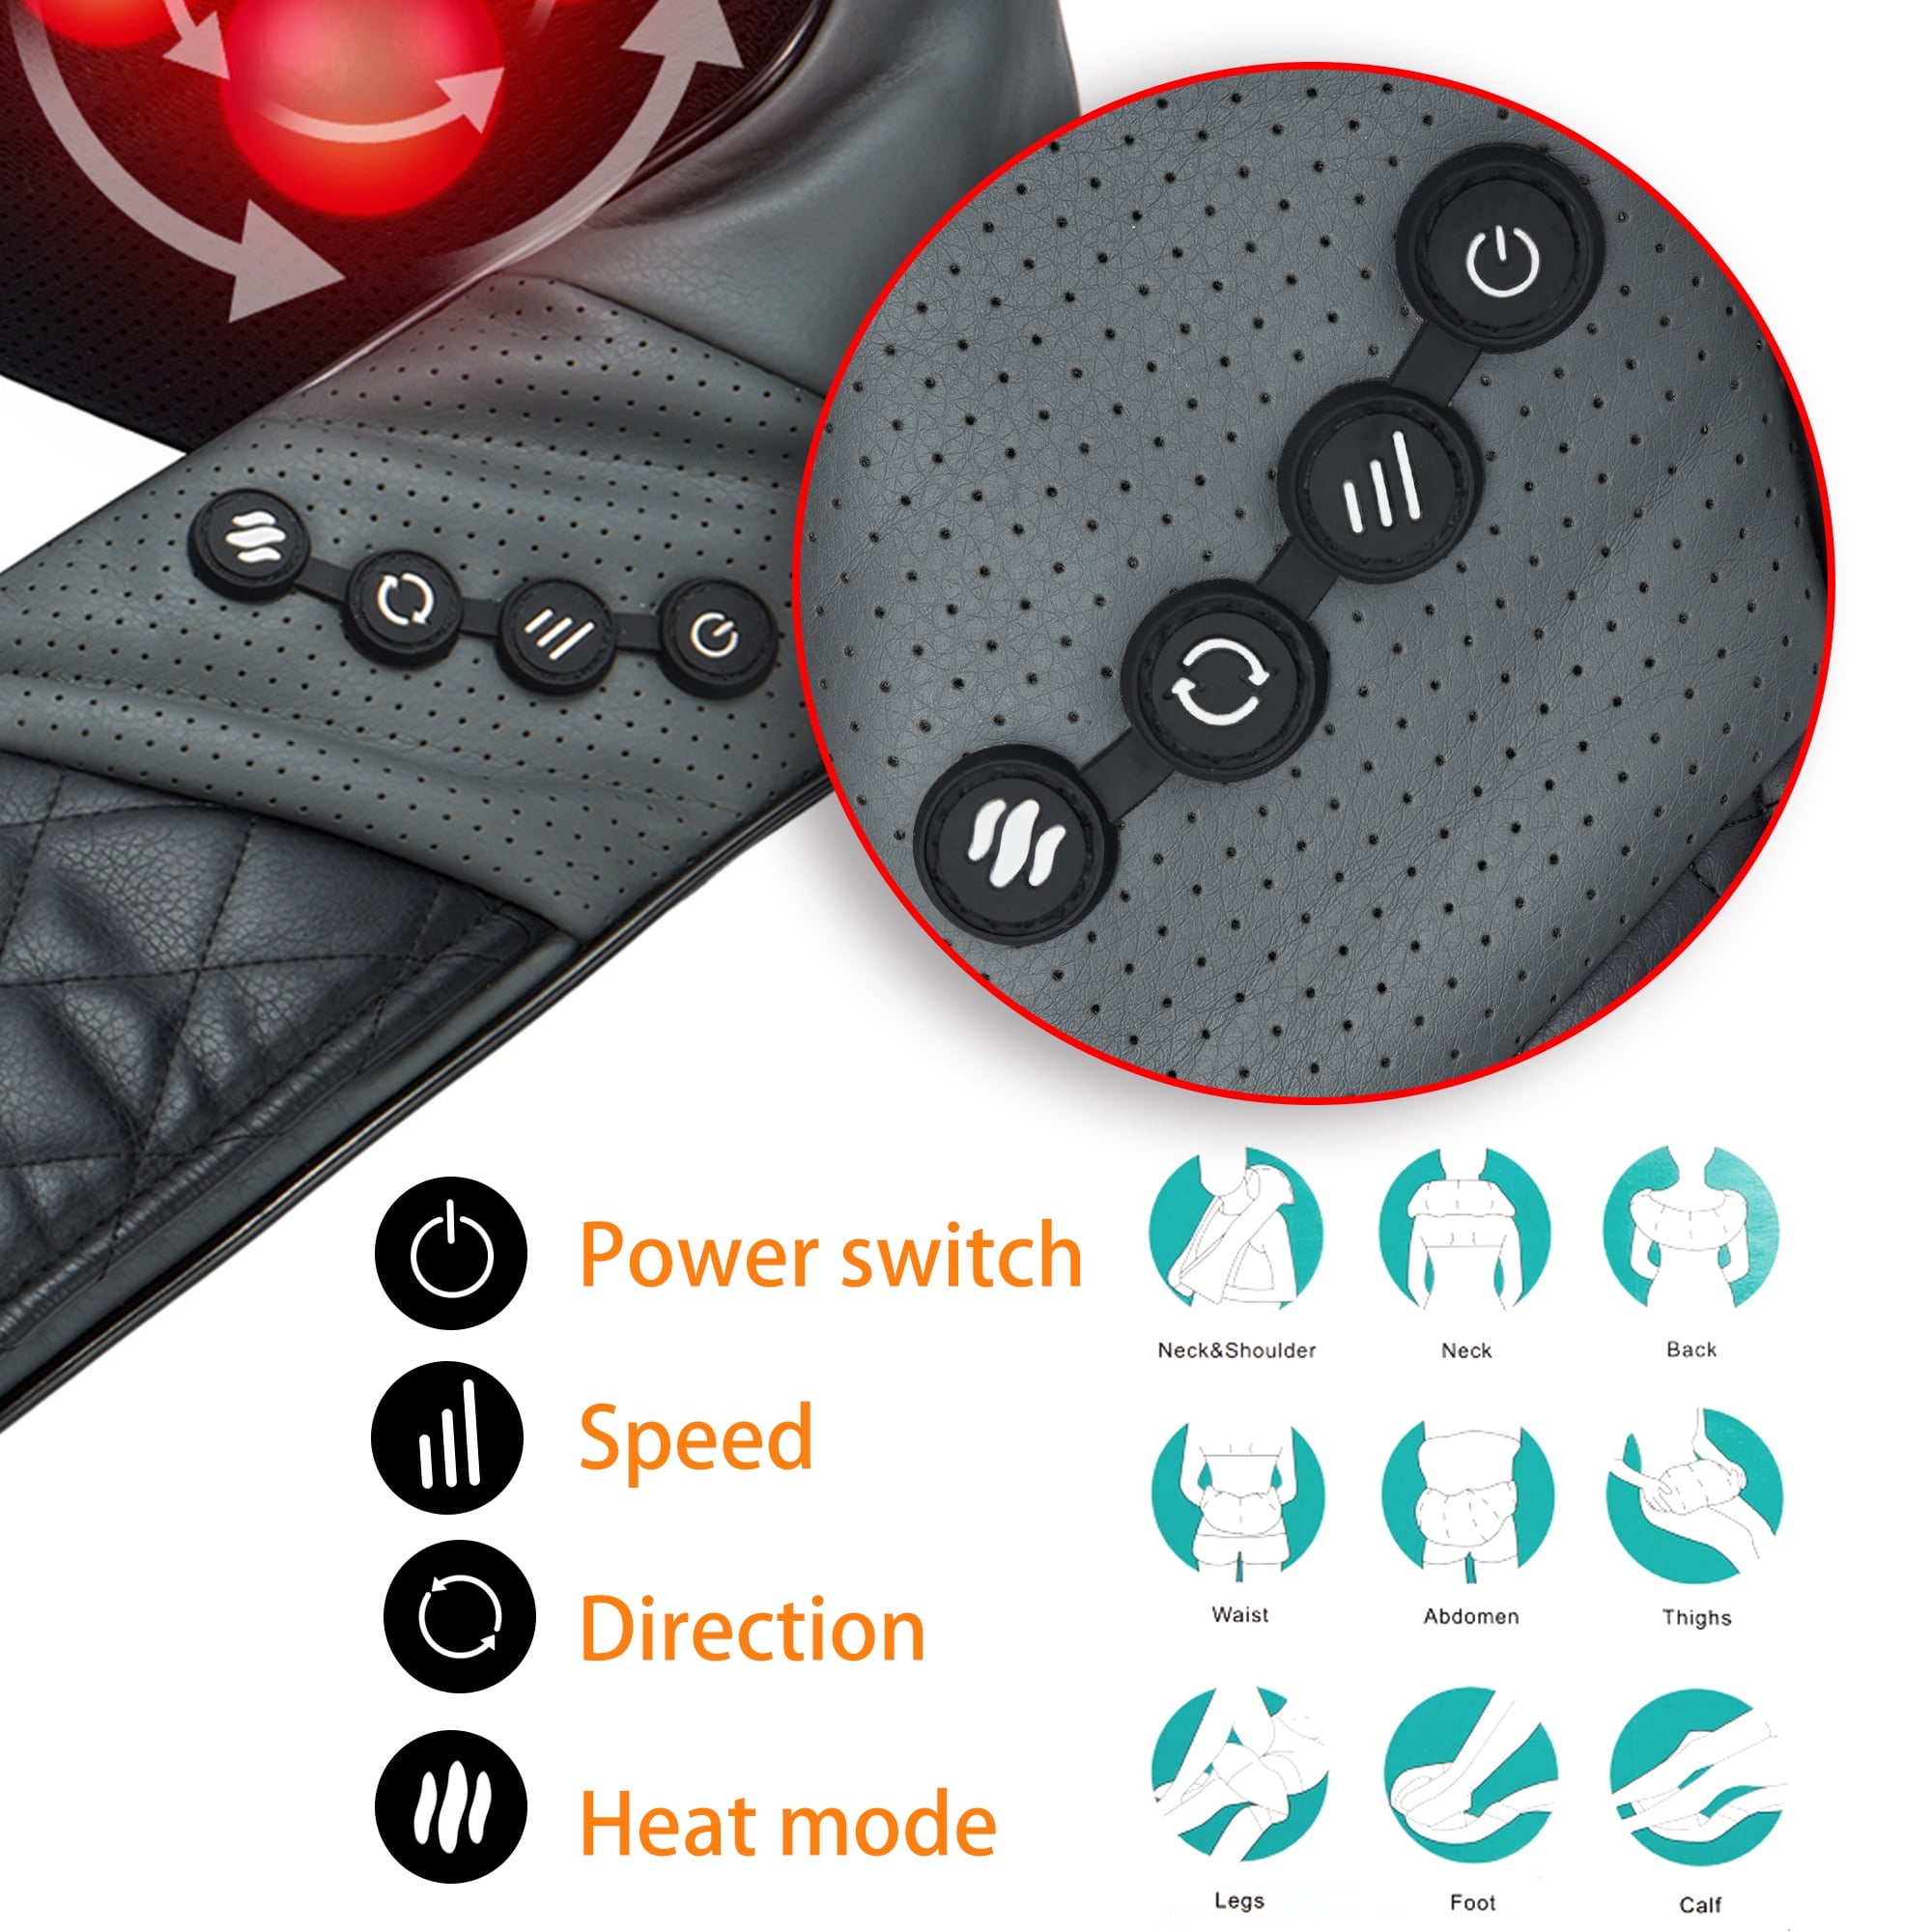 Liangzai Back Massager PU Material Electric Shoulder Massager with Heat Kneading Massager Shawl for Neck Back Shoulder Foot Leg Use at Home Office CA